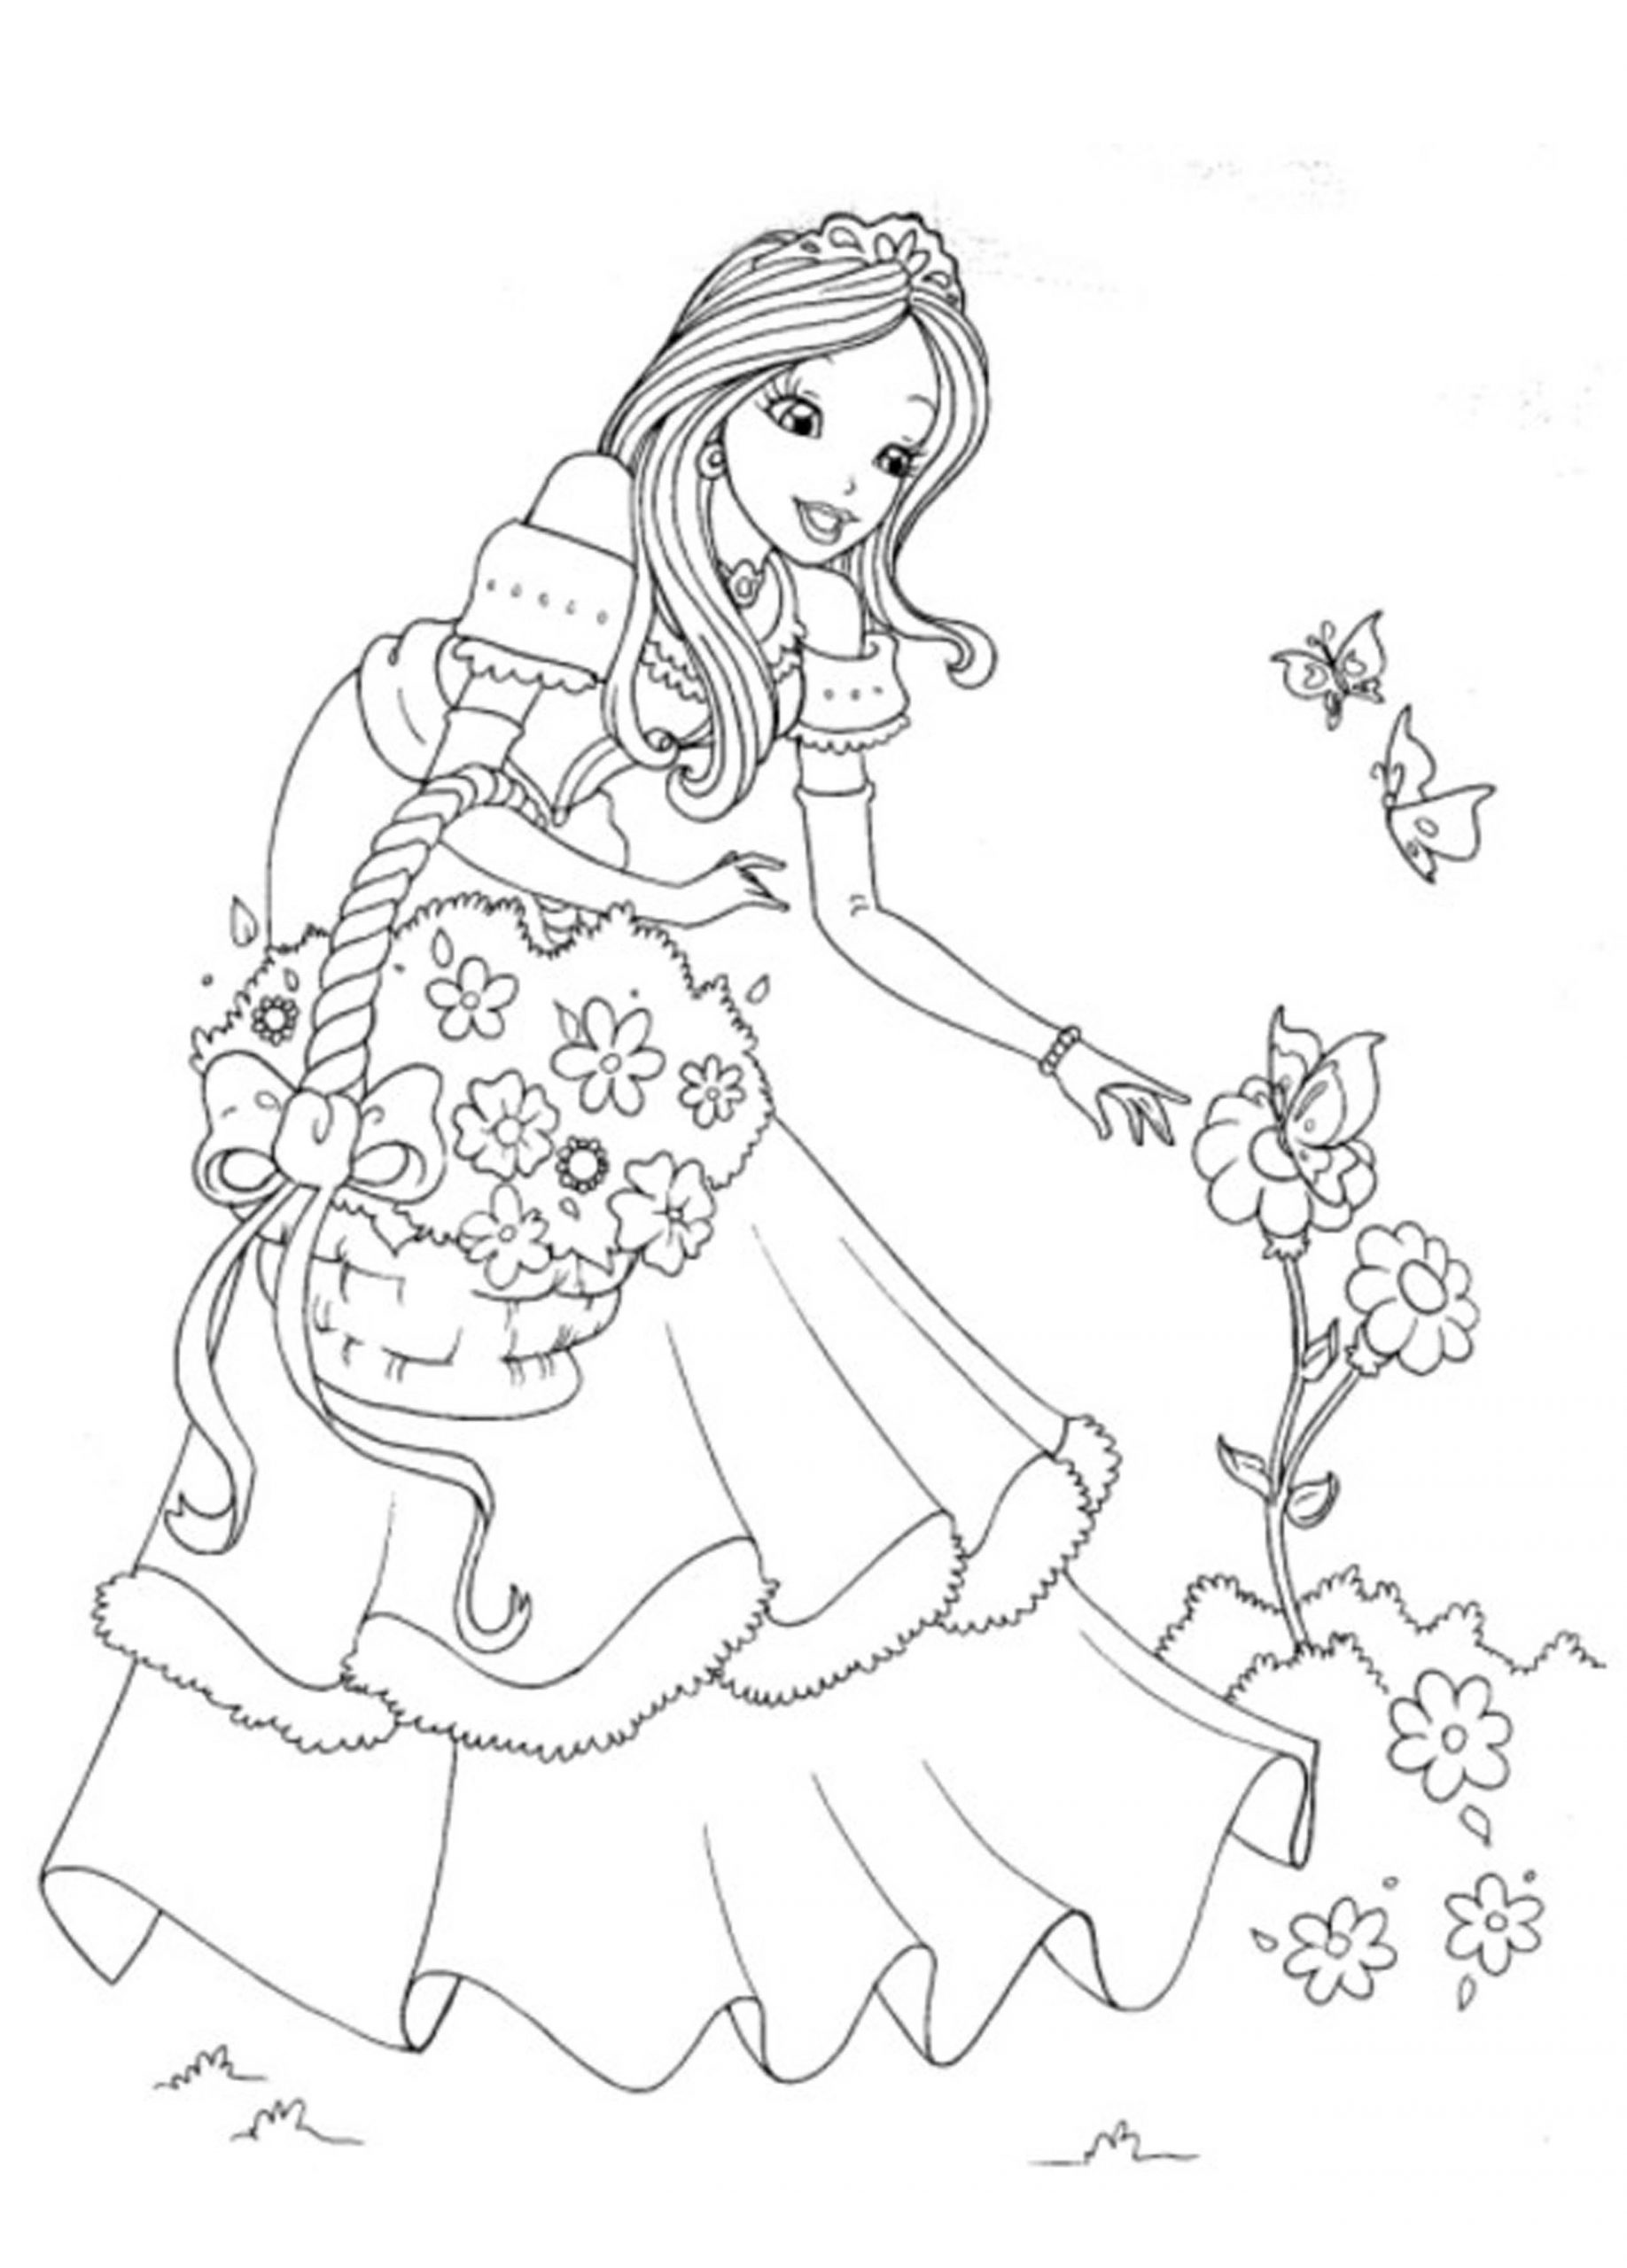 Coloring Pages : Princess Coloring Pages For Kids Free ...